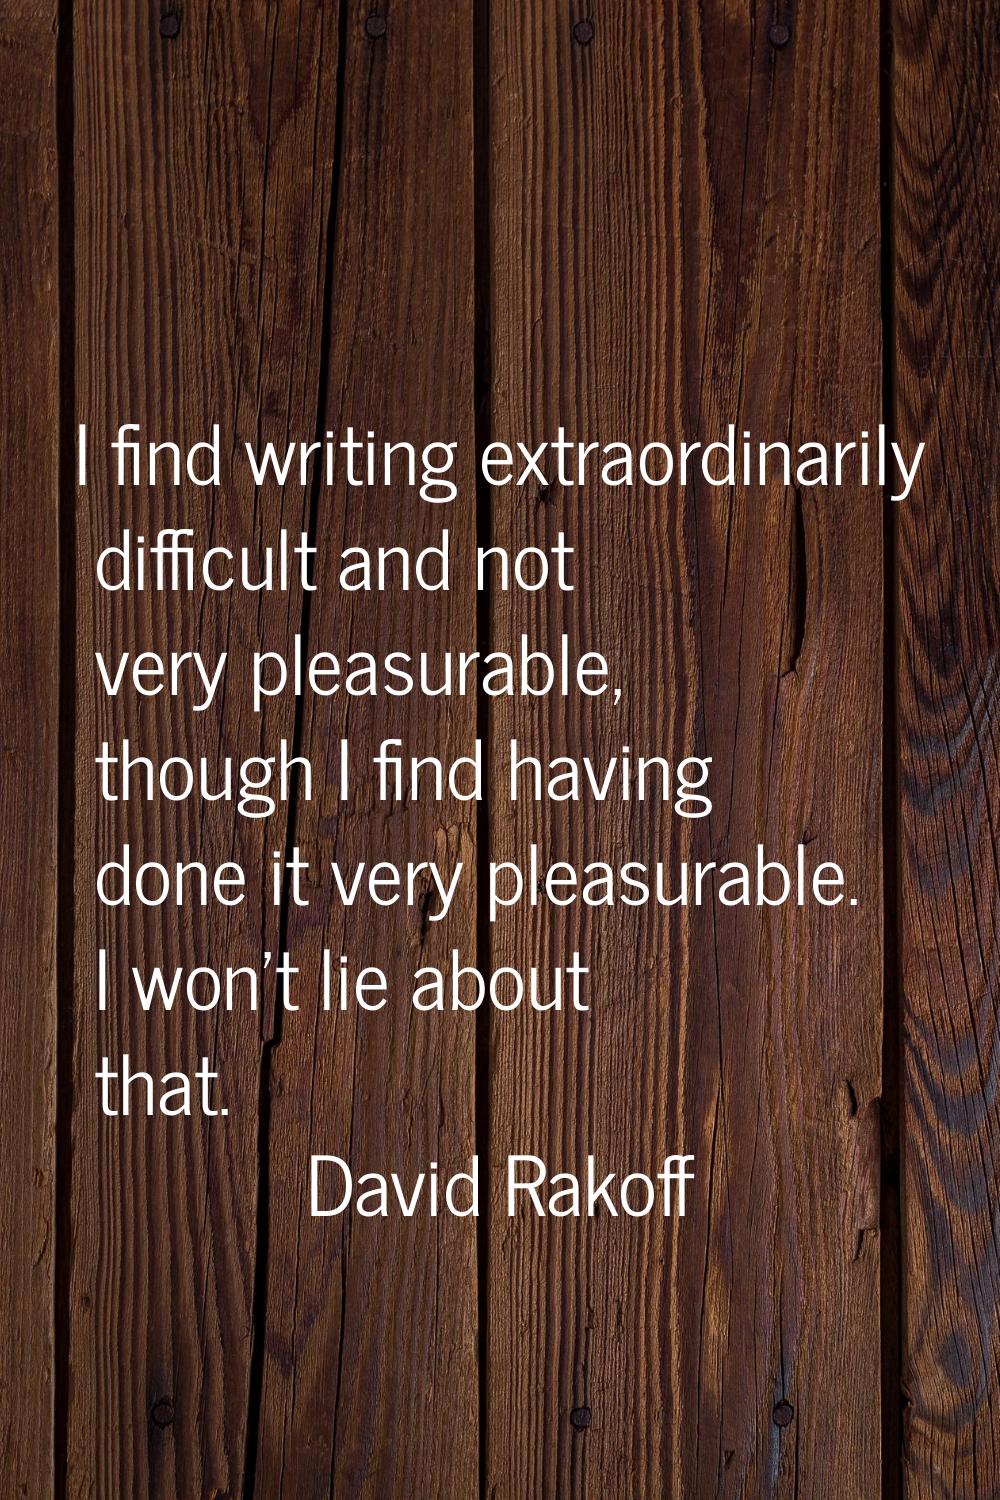 I find writing extraordinarily difficult and not very pleasurable, though I find having done it ver